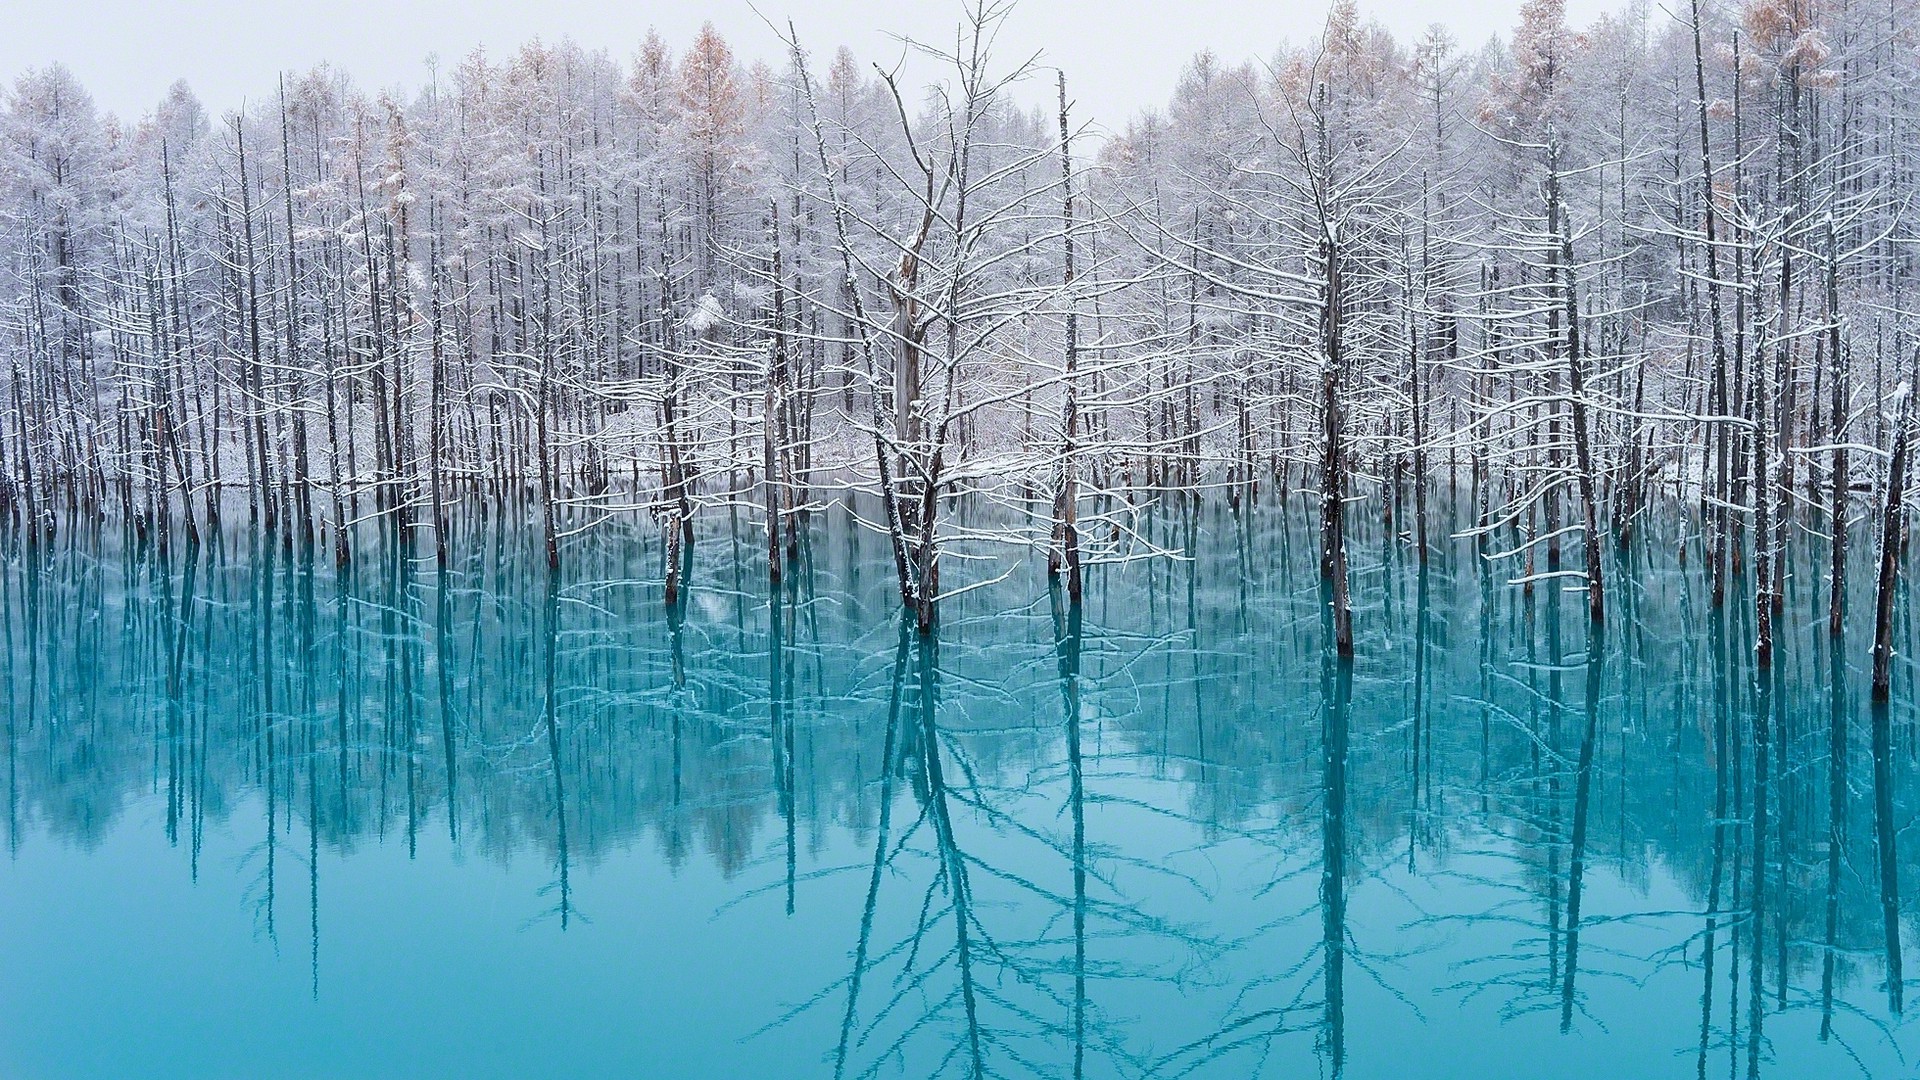 lake, Trees, Nature, Turquoise, Water, Snow, Reflection, Winter, Japan, Landscape, Cold, Mist, Forest Wallpaper